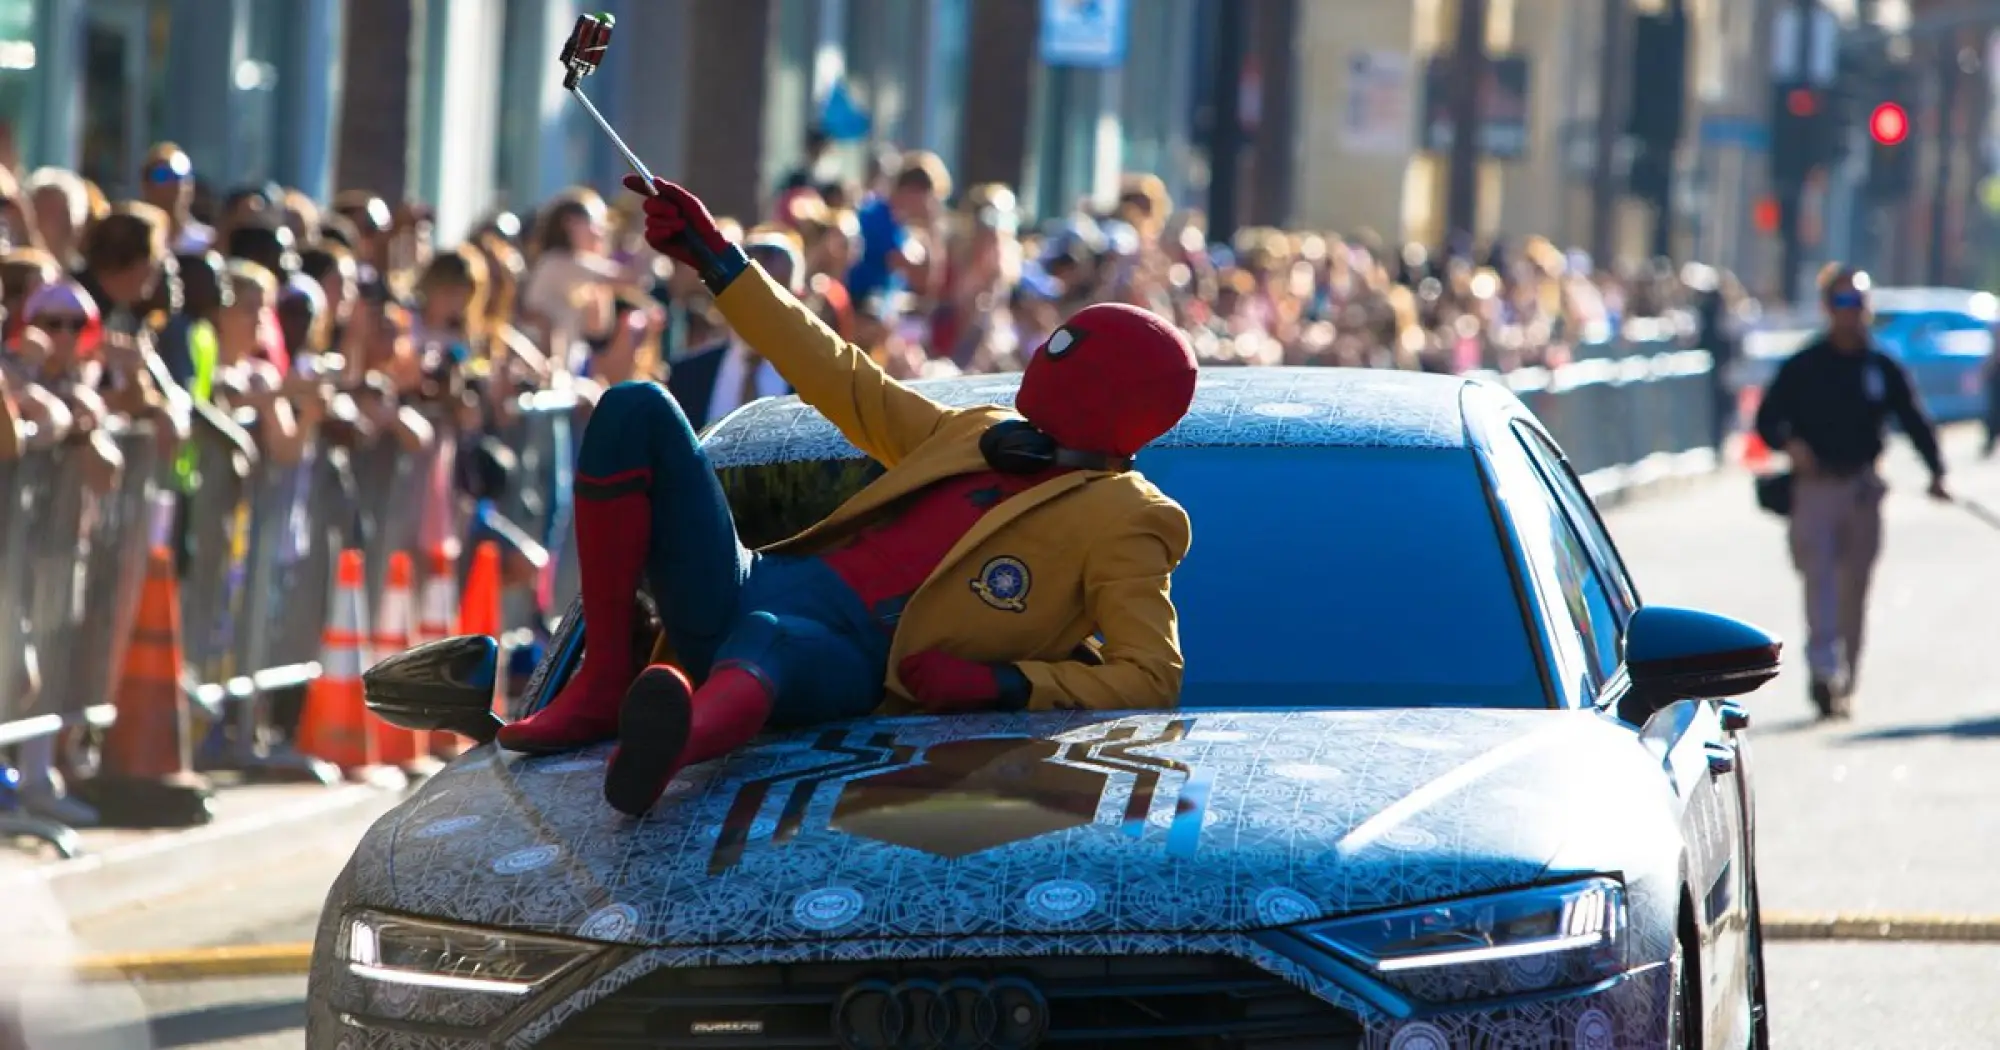 Audi A8 MY 2018 - Spiderman Homecoming - 4